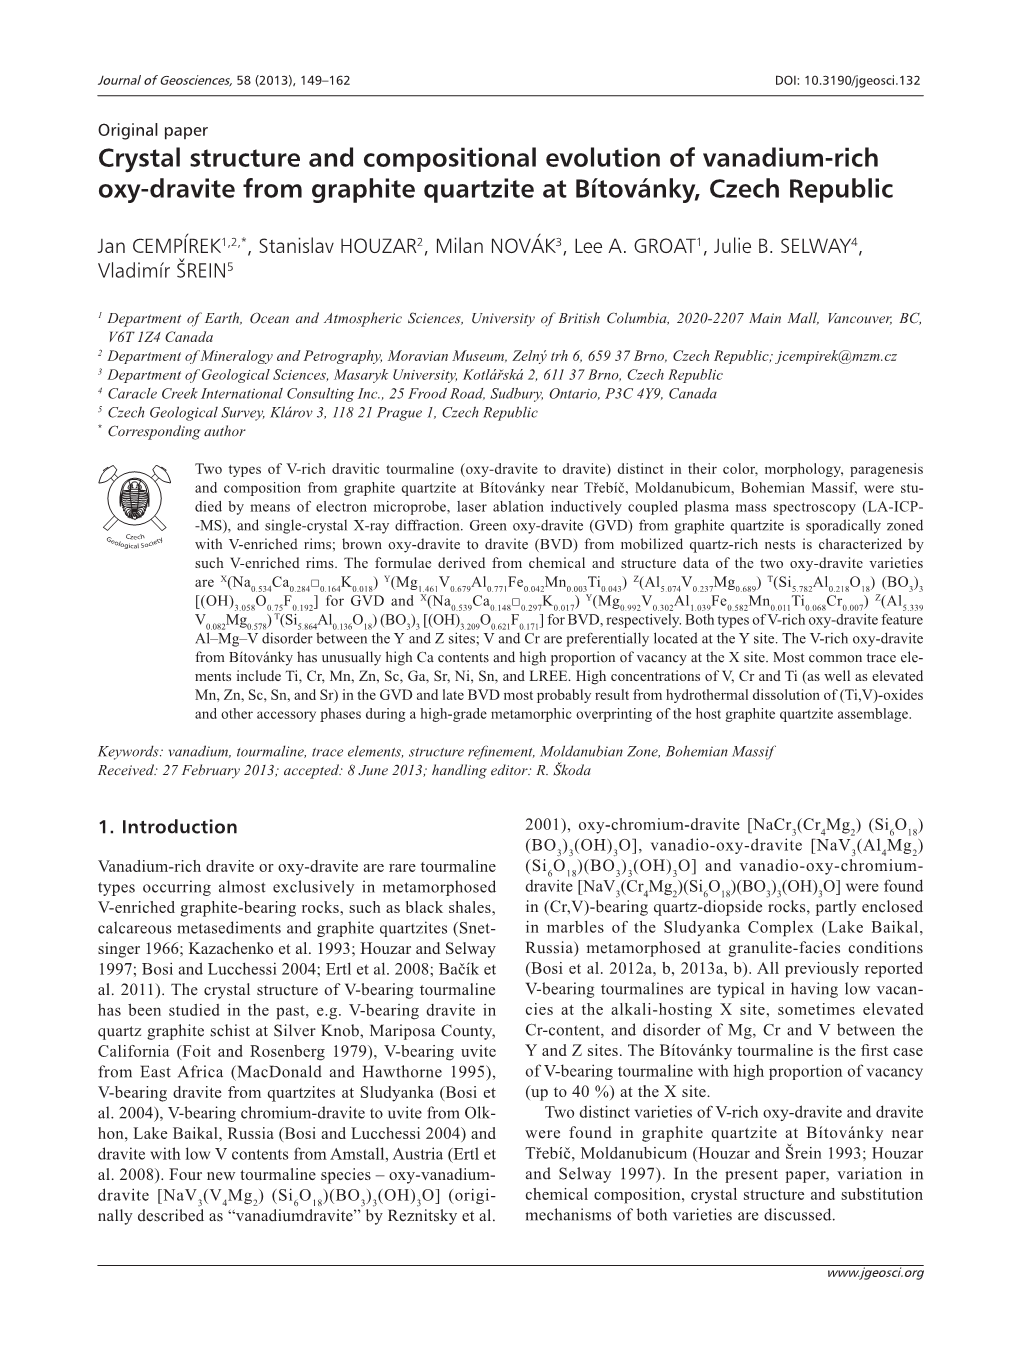 Crystal Structure and Compositional Evolution of Vanadium-Rich Oxy‑Dravite from Graphite Quartzite at Bítovánky, Czech Republic